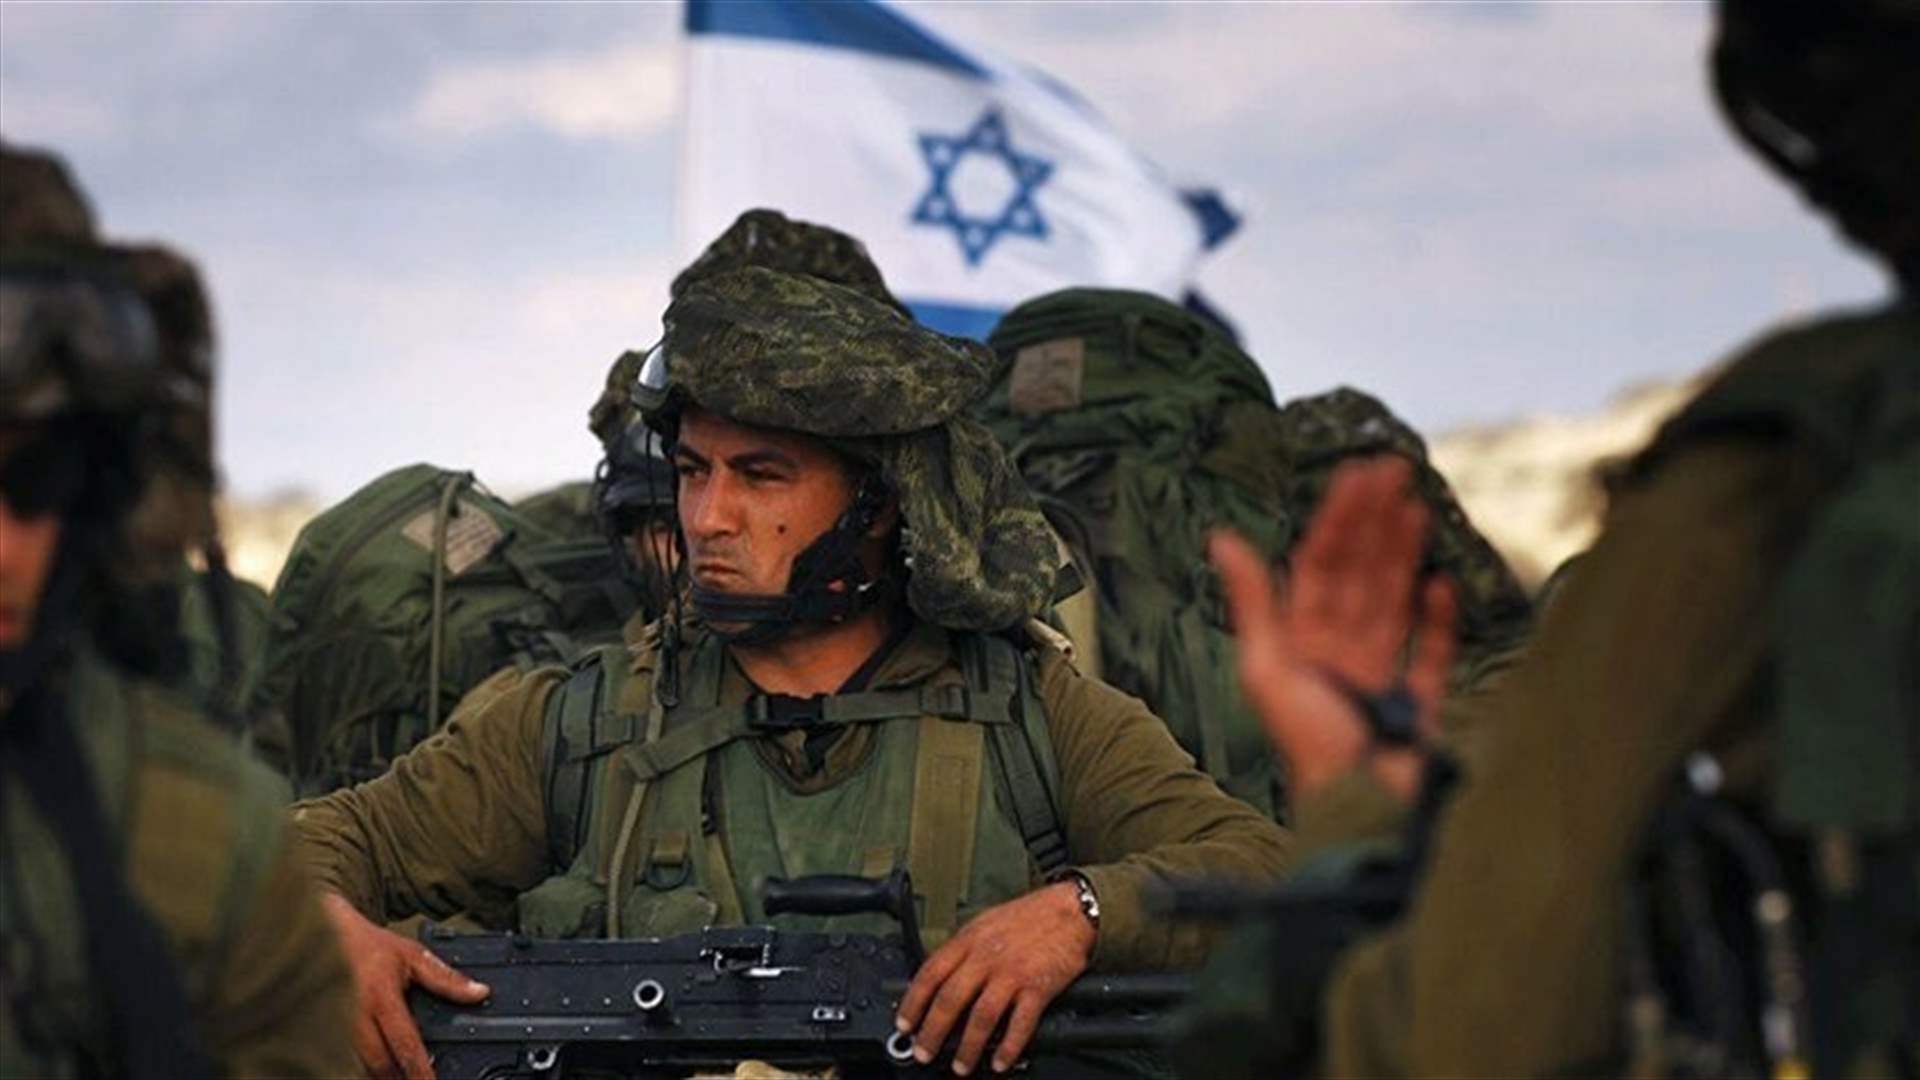 The Israeli army warns civilians in Gaza that the area has become a battlefield